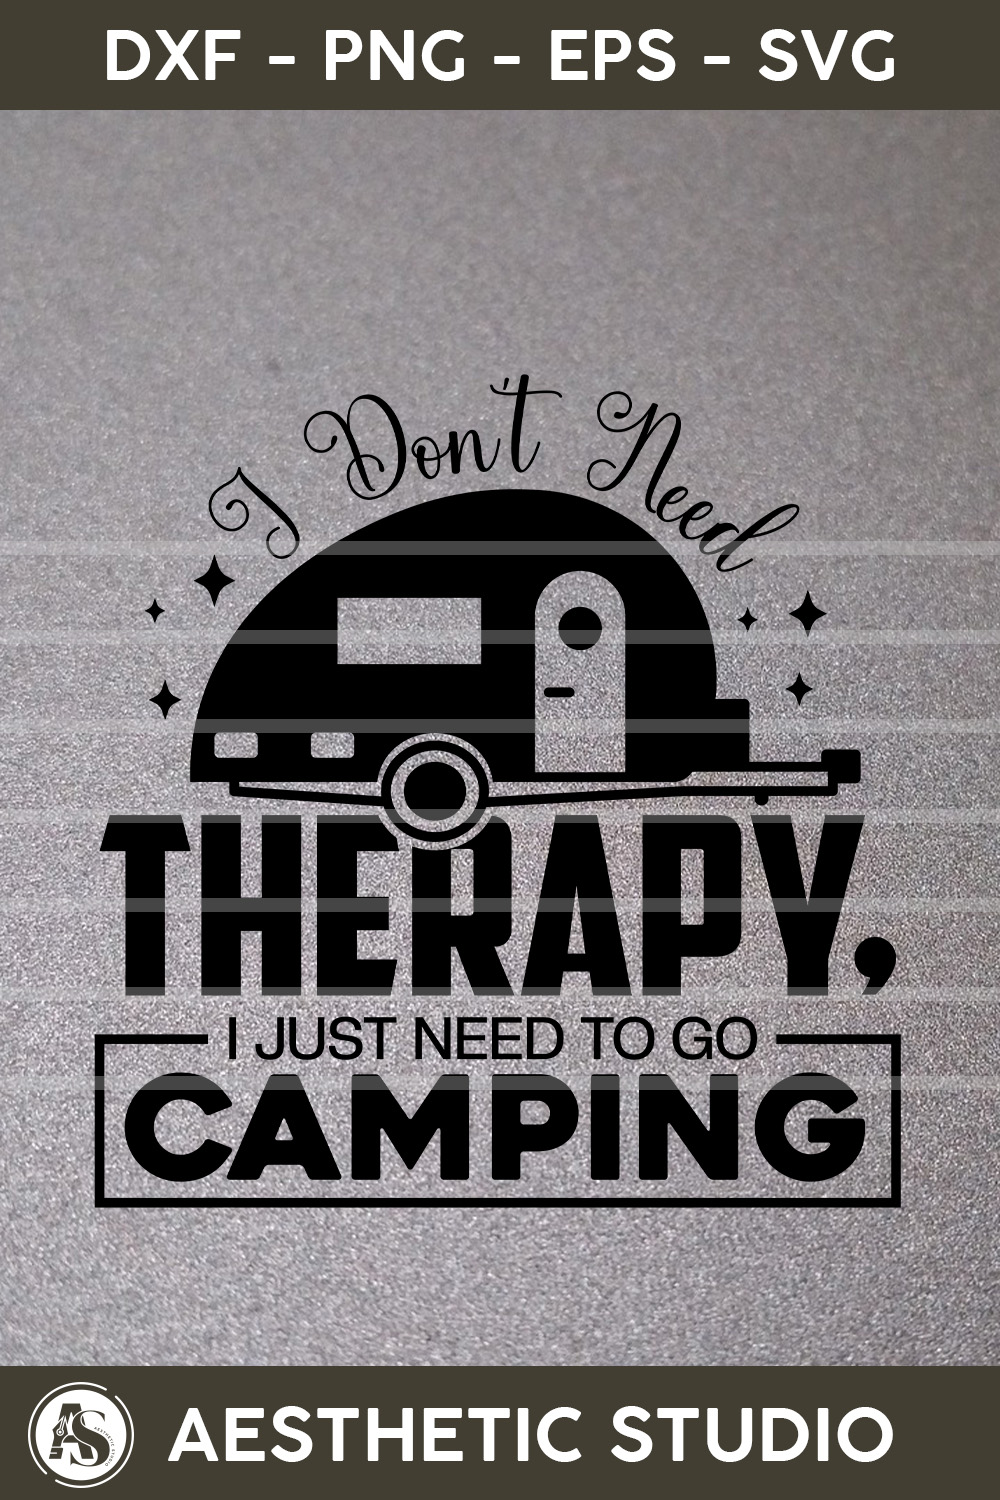 I Don’t Need Therapy I Just Need To Go Camping, Camper, Adventure, Camp Life, Camping Svg, Typography, Camping Quotes, Camping Cut File, Funny Camping, Camping T-shirt Design, Svg, Eps, Dxf, Png, Cut file pinterest preview image.